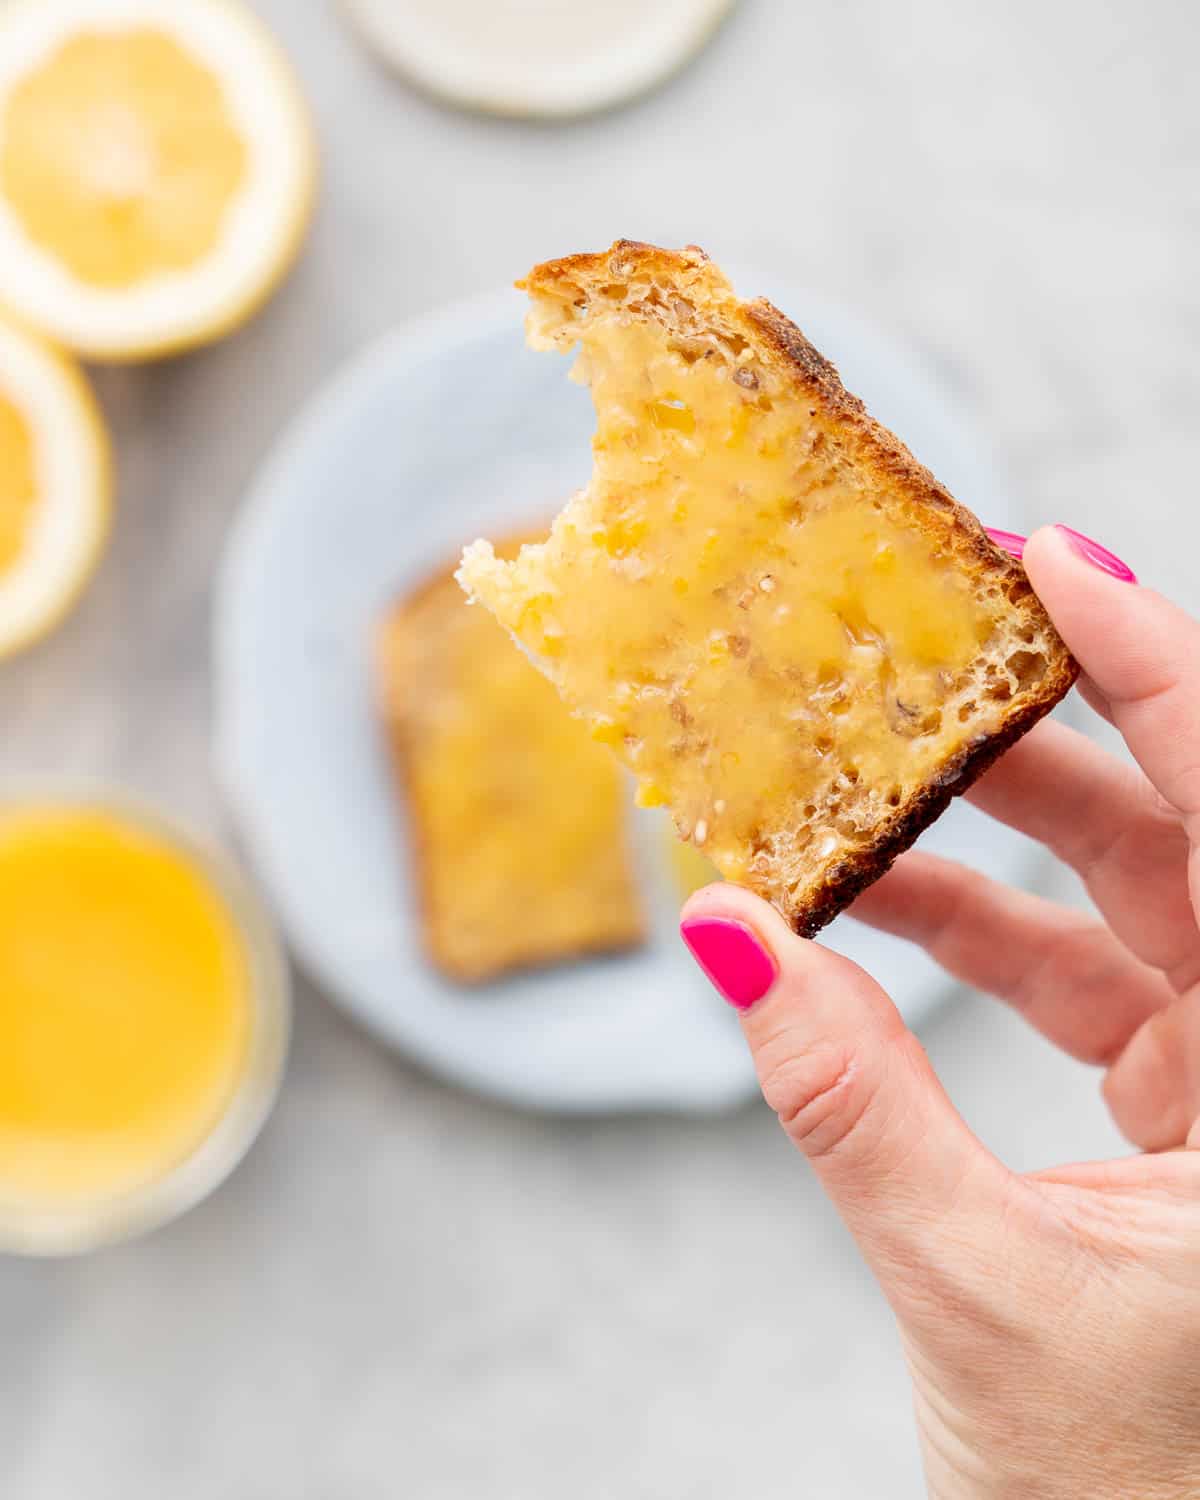 A hand holding up a slice of toast with Lemon Butter spread on it which is held above the other half of toast on a plate below